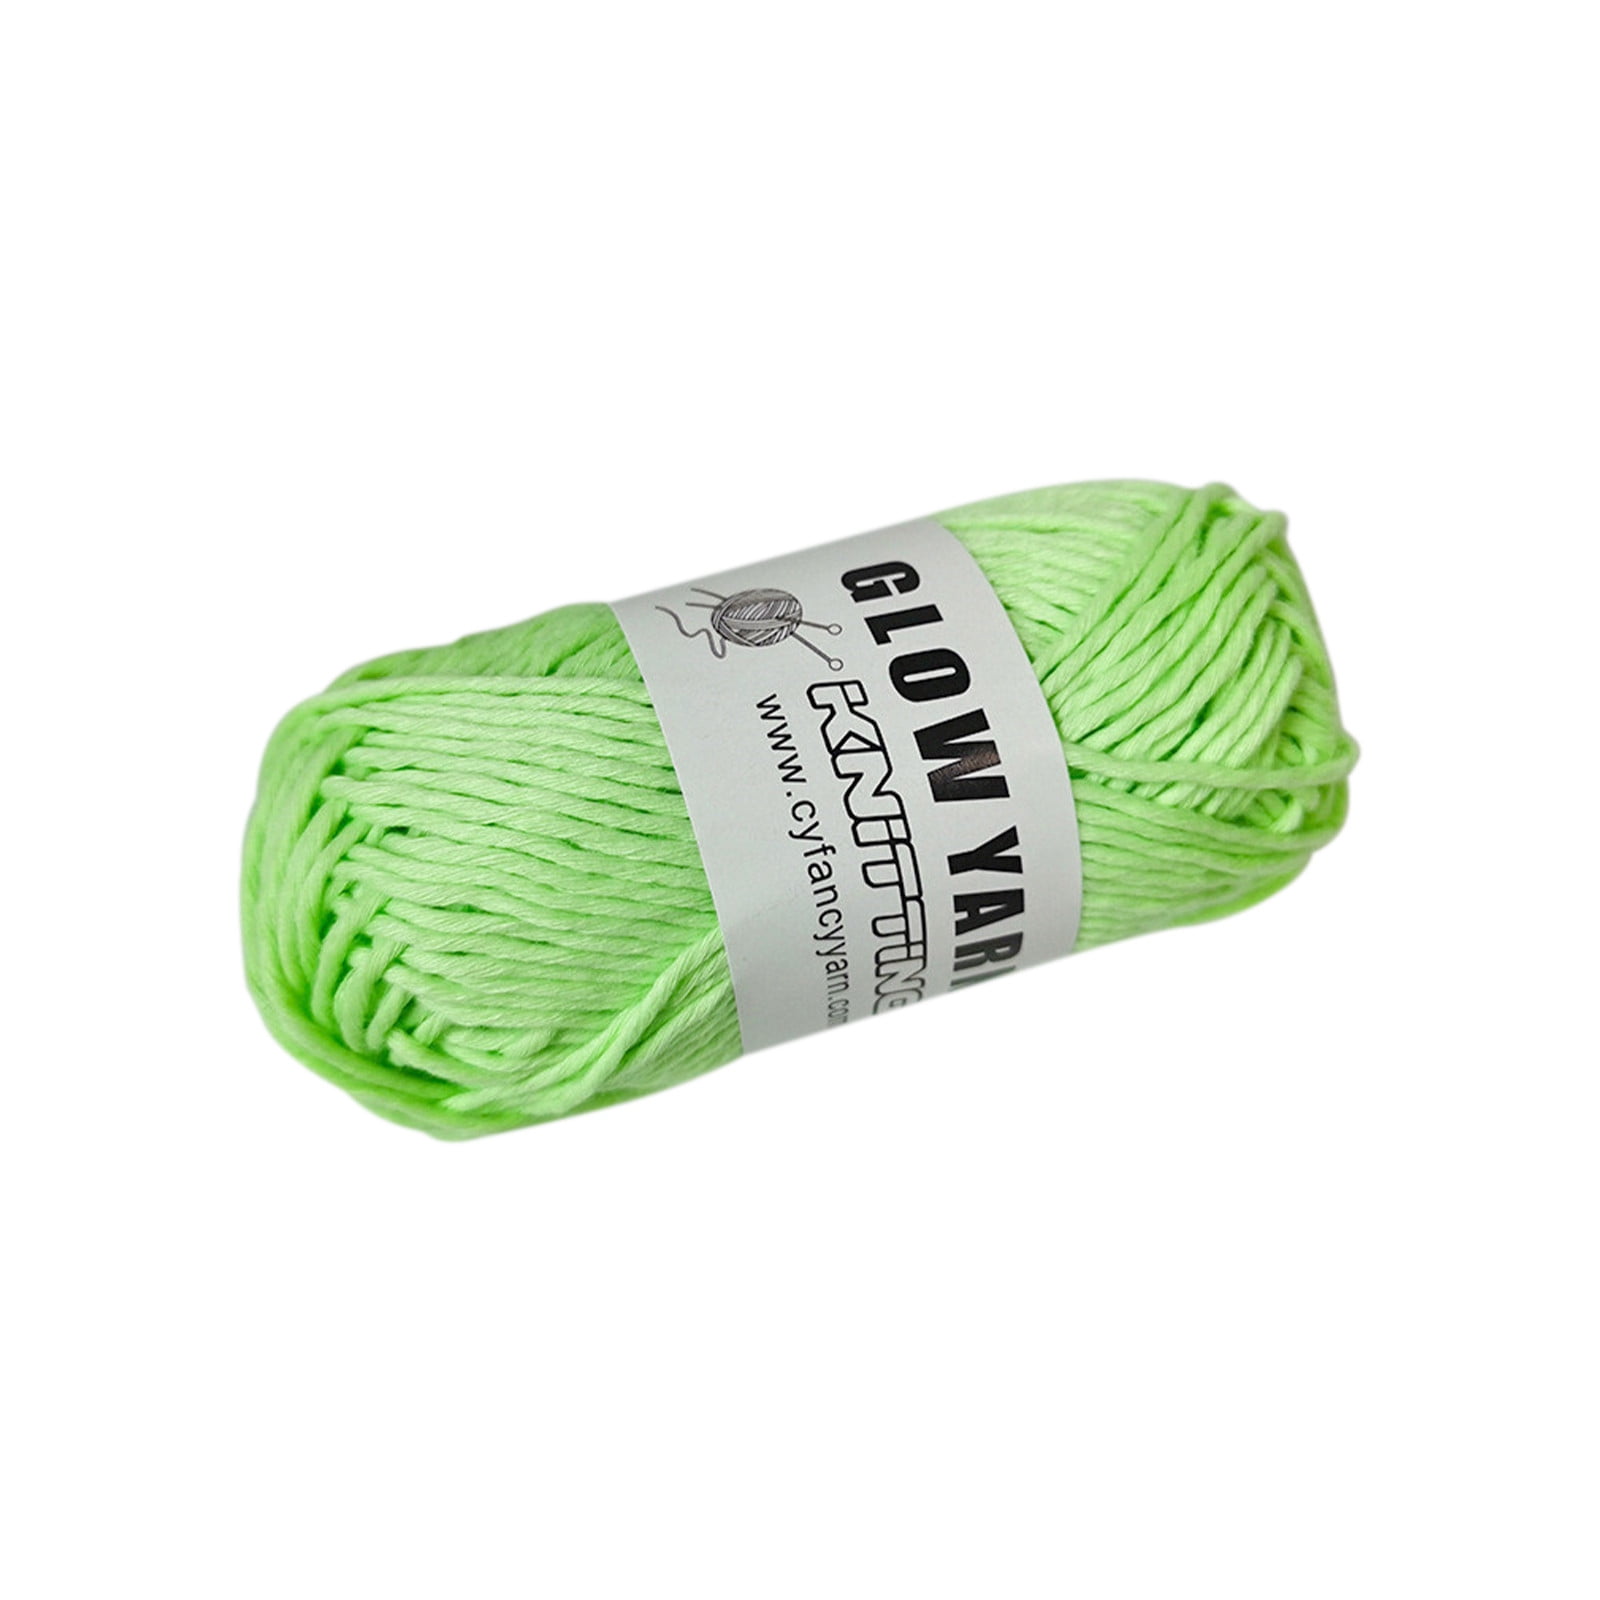  5Pcs Glow in The Dark Yarn, Luminous Thick Yarn for Crocheting,  55 Yards Sewing Supplies, Scrubby Yarn for Beginners I Love This Yarn for  Knitting,Crochet and DIY Party Supplies Fluorescent 5